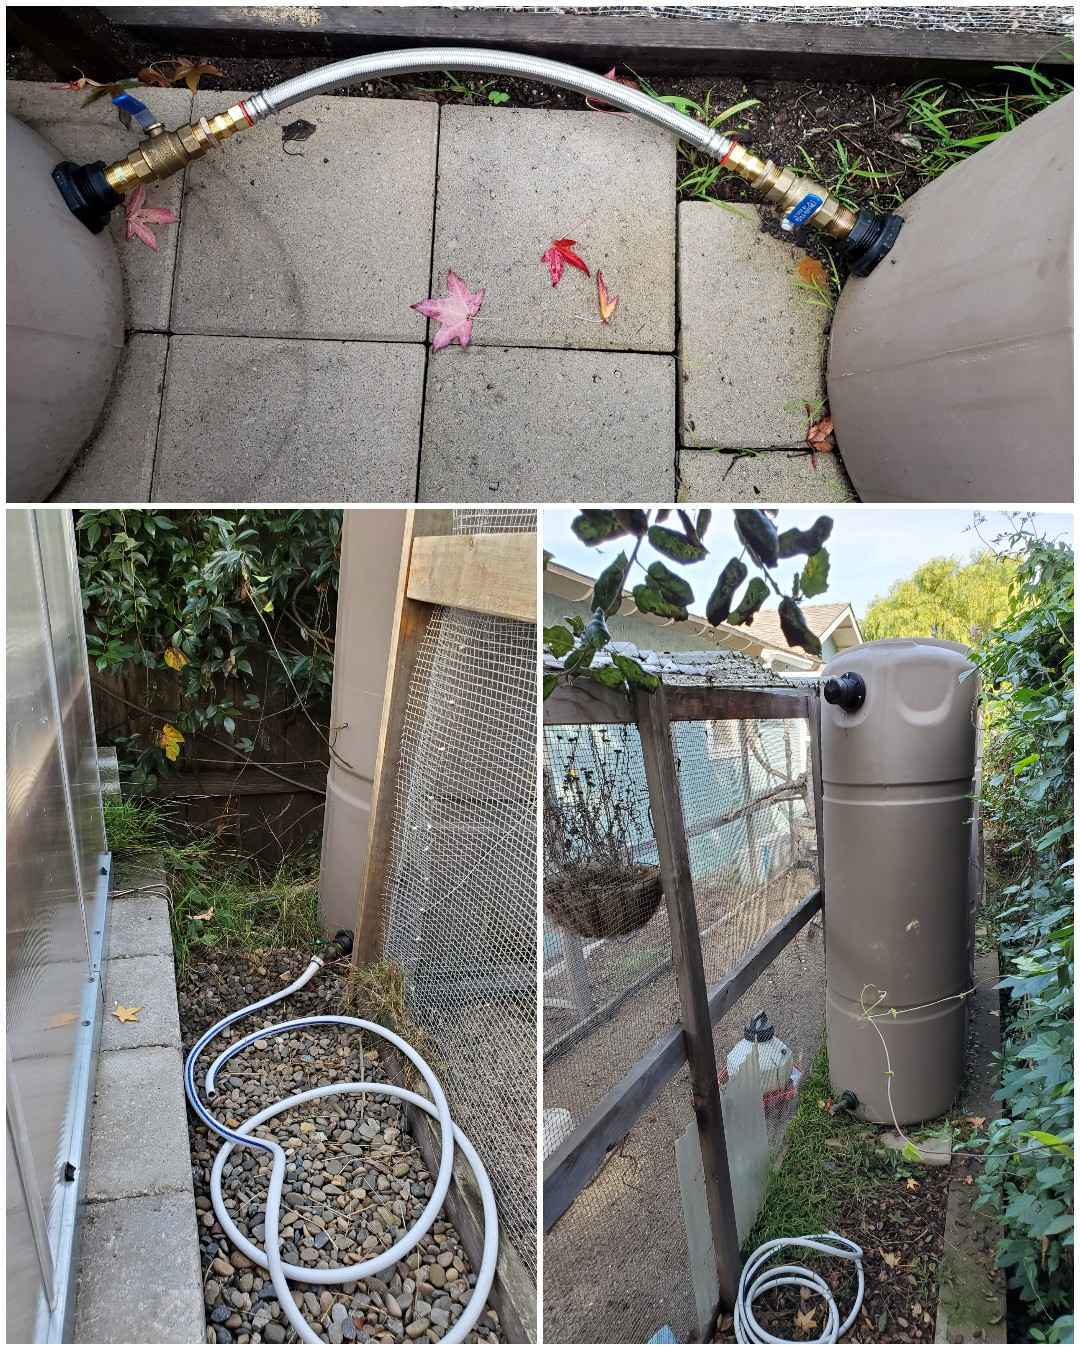 A three way image collage, the first image shows the two rain tanks connected at the bottom of each tank by a hose bib that is connected to a thick pipe. Each one can be opened to  allow the water from one to flow into the next. The second image shows a hose bib connected to a small section of hose at the opposite end of the rain tank as previously shown. This is where the rain water is harvested from fro use in the garden. The third image shows the other rain tank and the hose bib connected to the bottom with a hose lying nearby for easy use. 